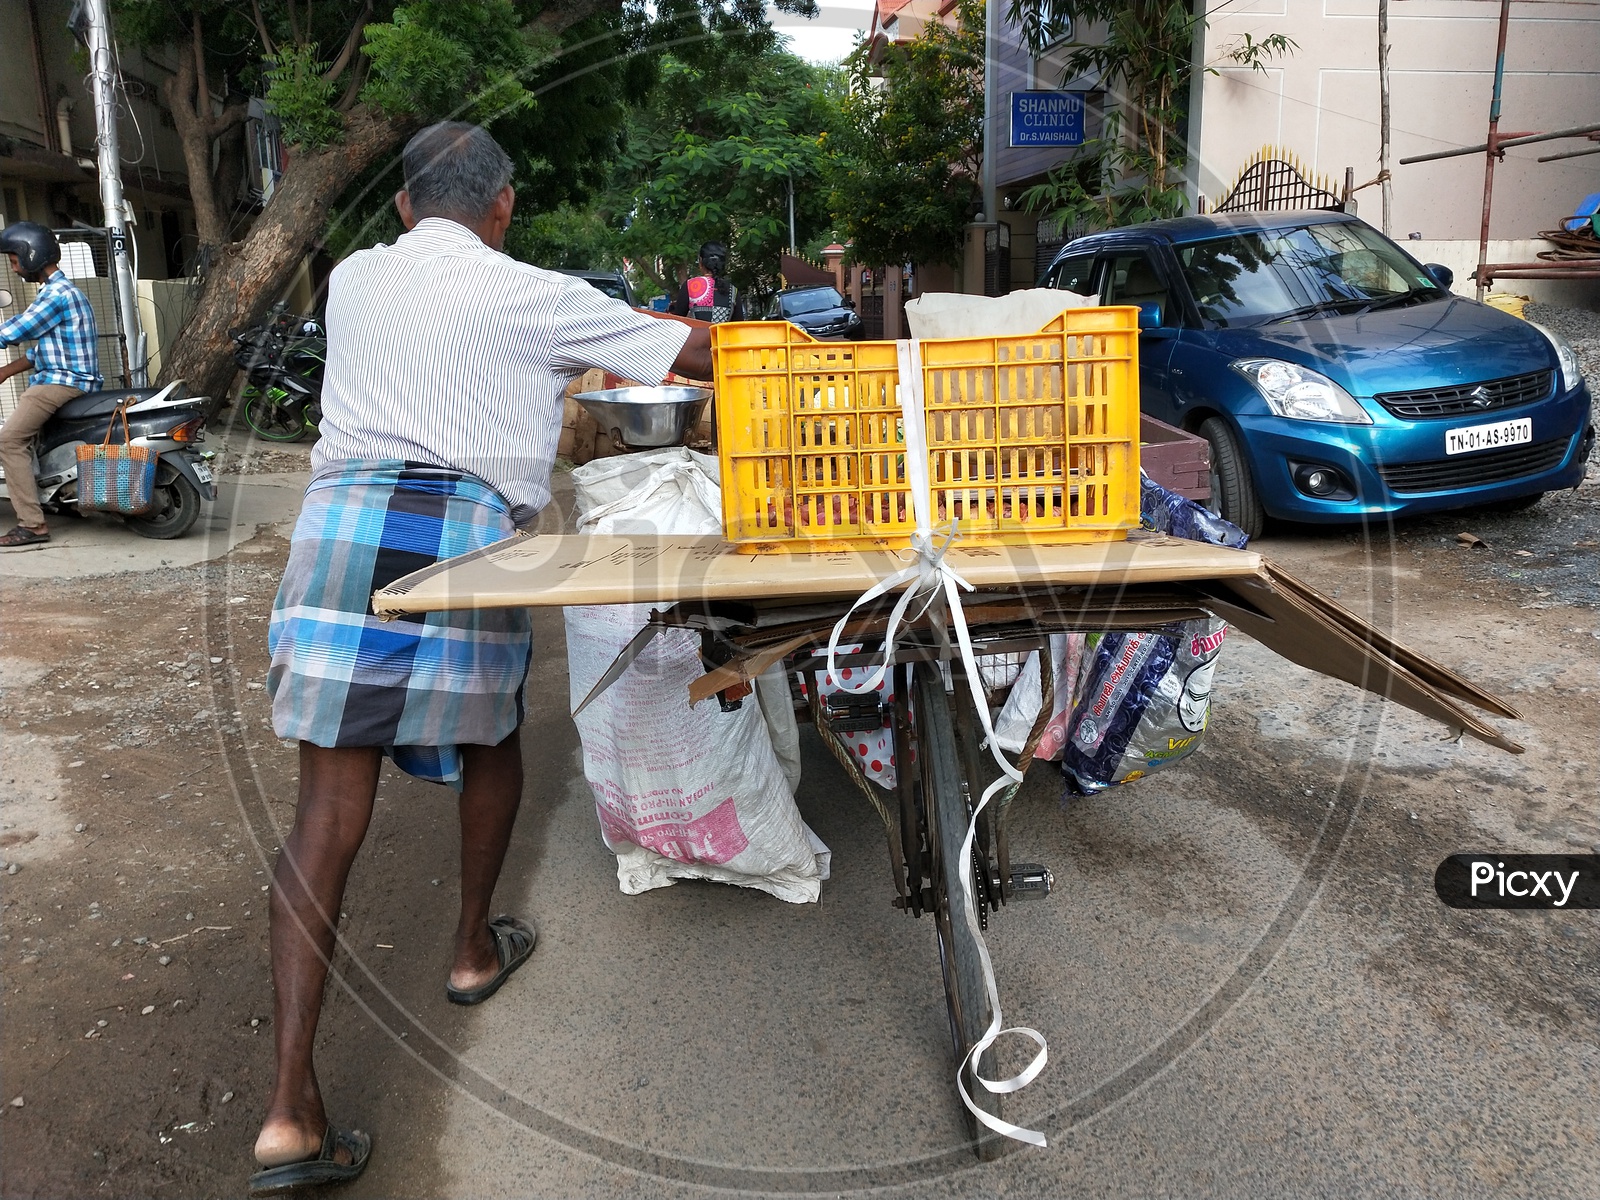 Vendor collecting recyclable sheets and goods by travelling on bicycle